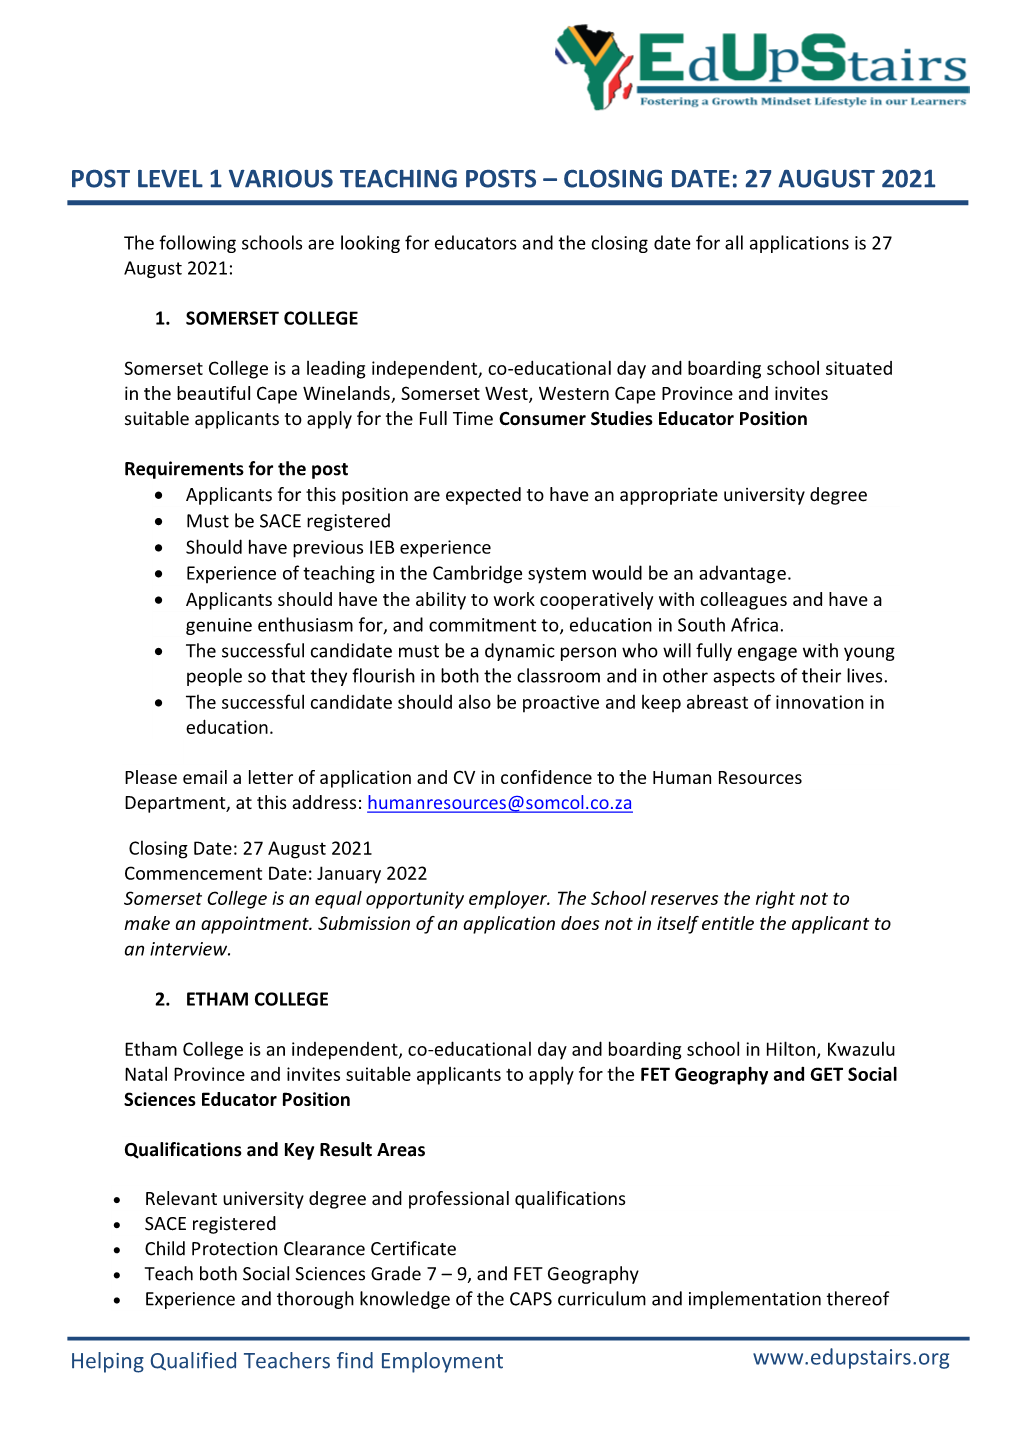 Post Level 1 Various Teaching Posts – Closing Date: 27 August 2021